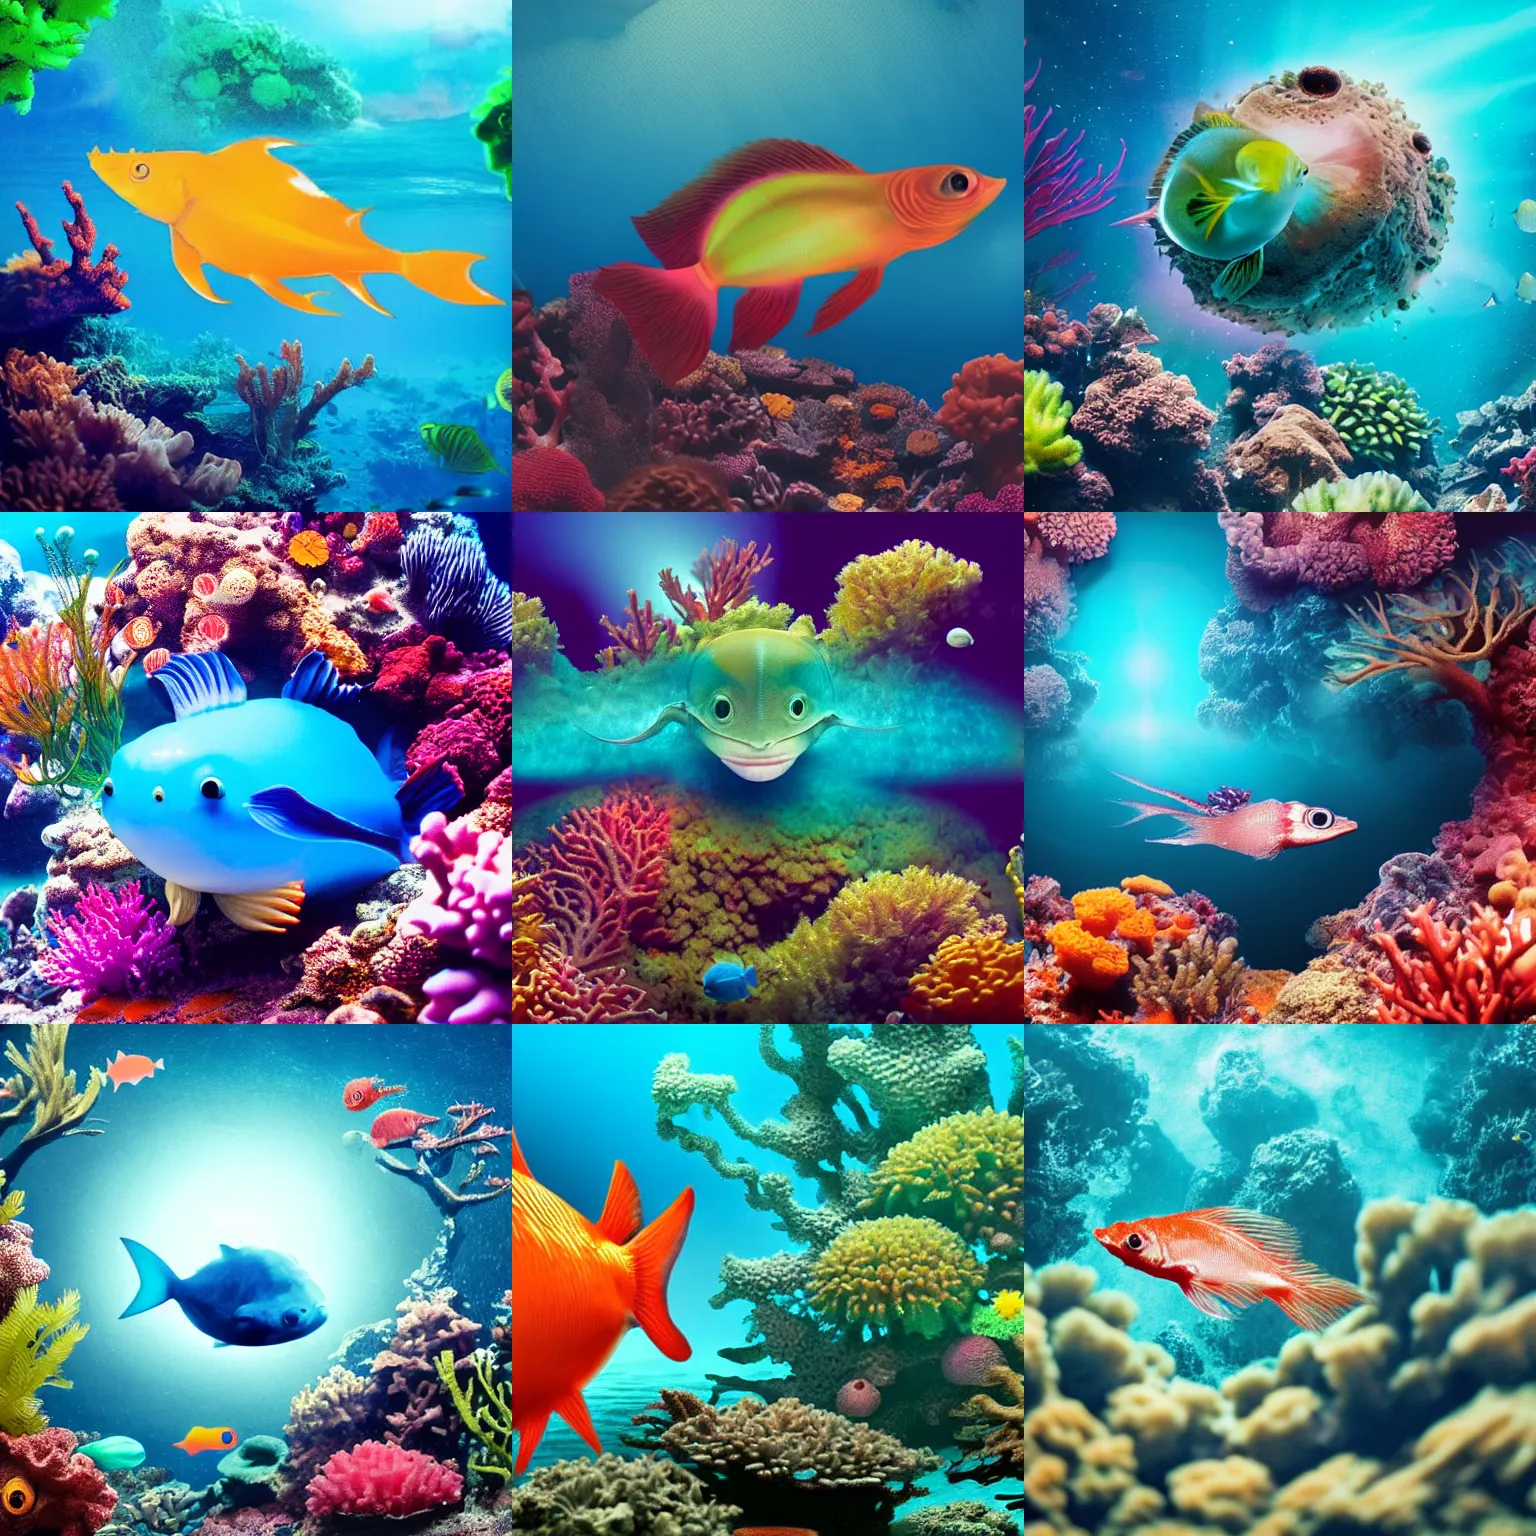 Prompt: photo of an extremely cute alien fish swimming an alien habitable underwater planet, coral reefs, dream - like atmosphere, water, plants, peaceful, serenity, calm ocean, tansparent water, reefs, fish, coral, inner peace, awareness, silence, nature, evolution